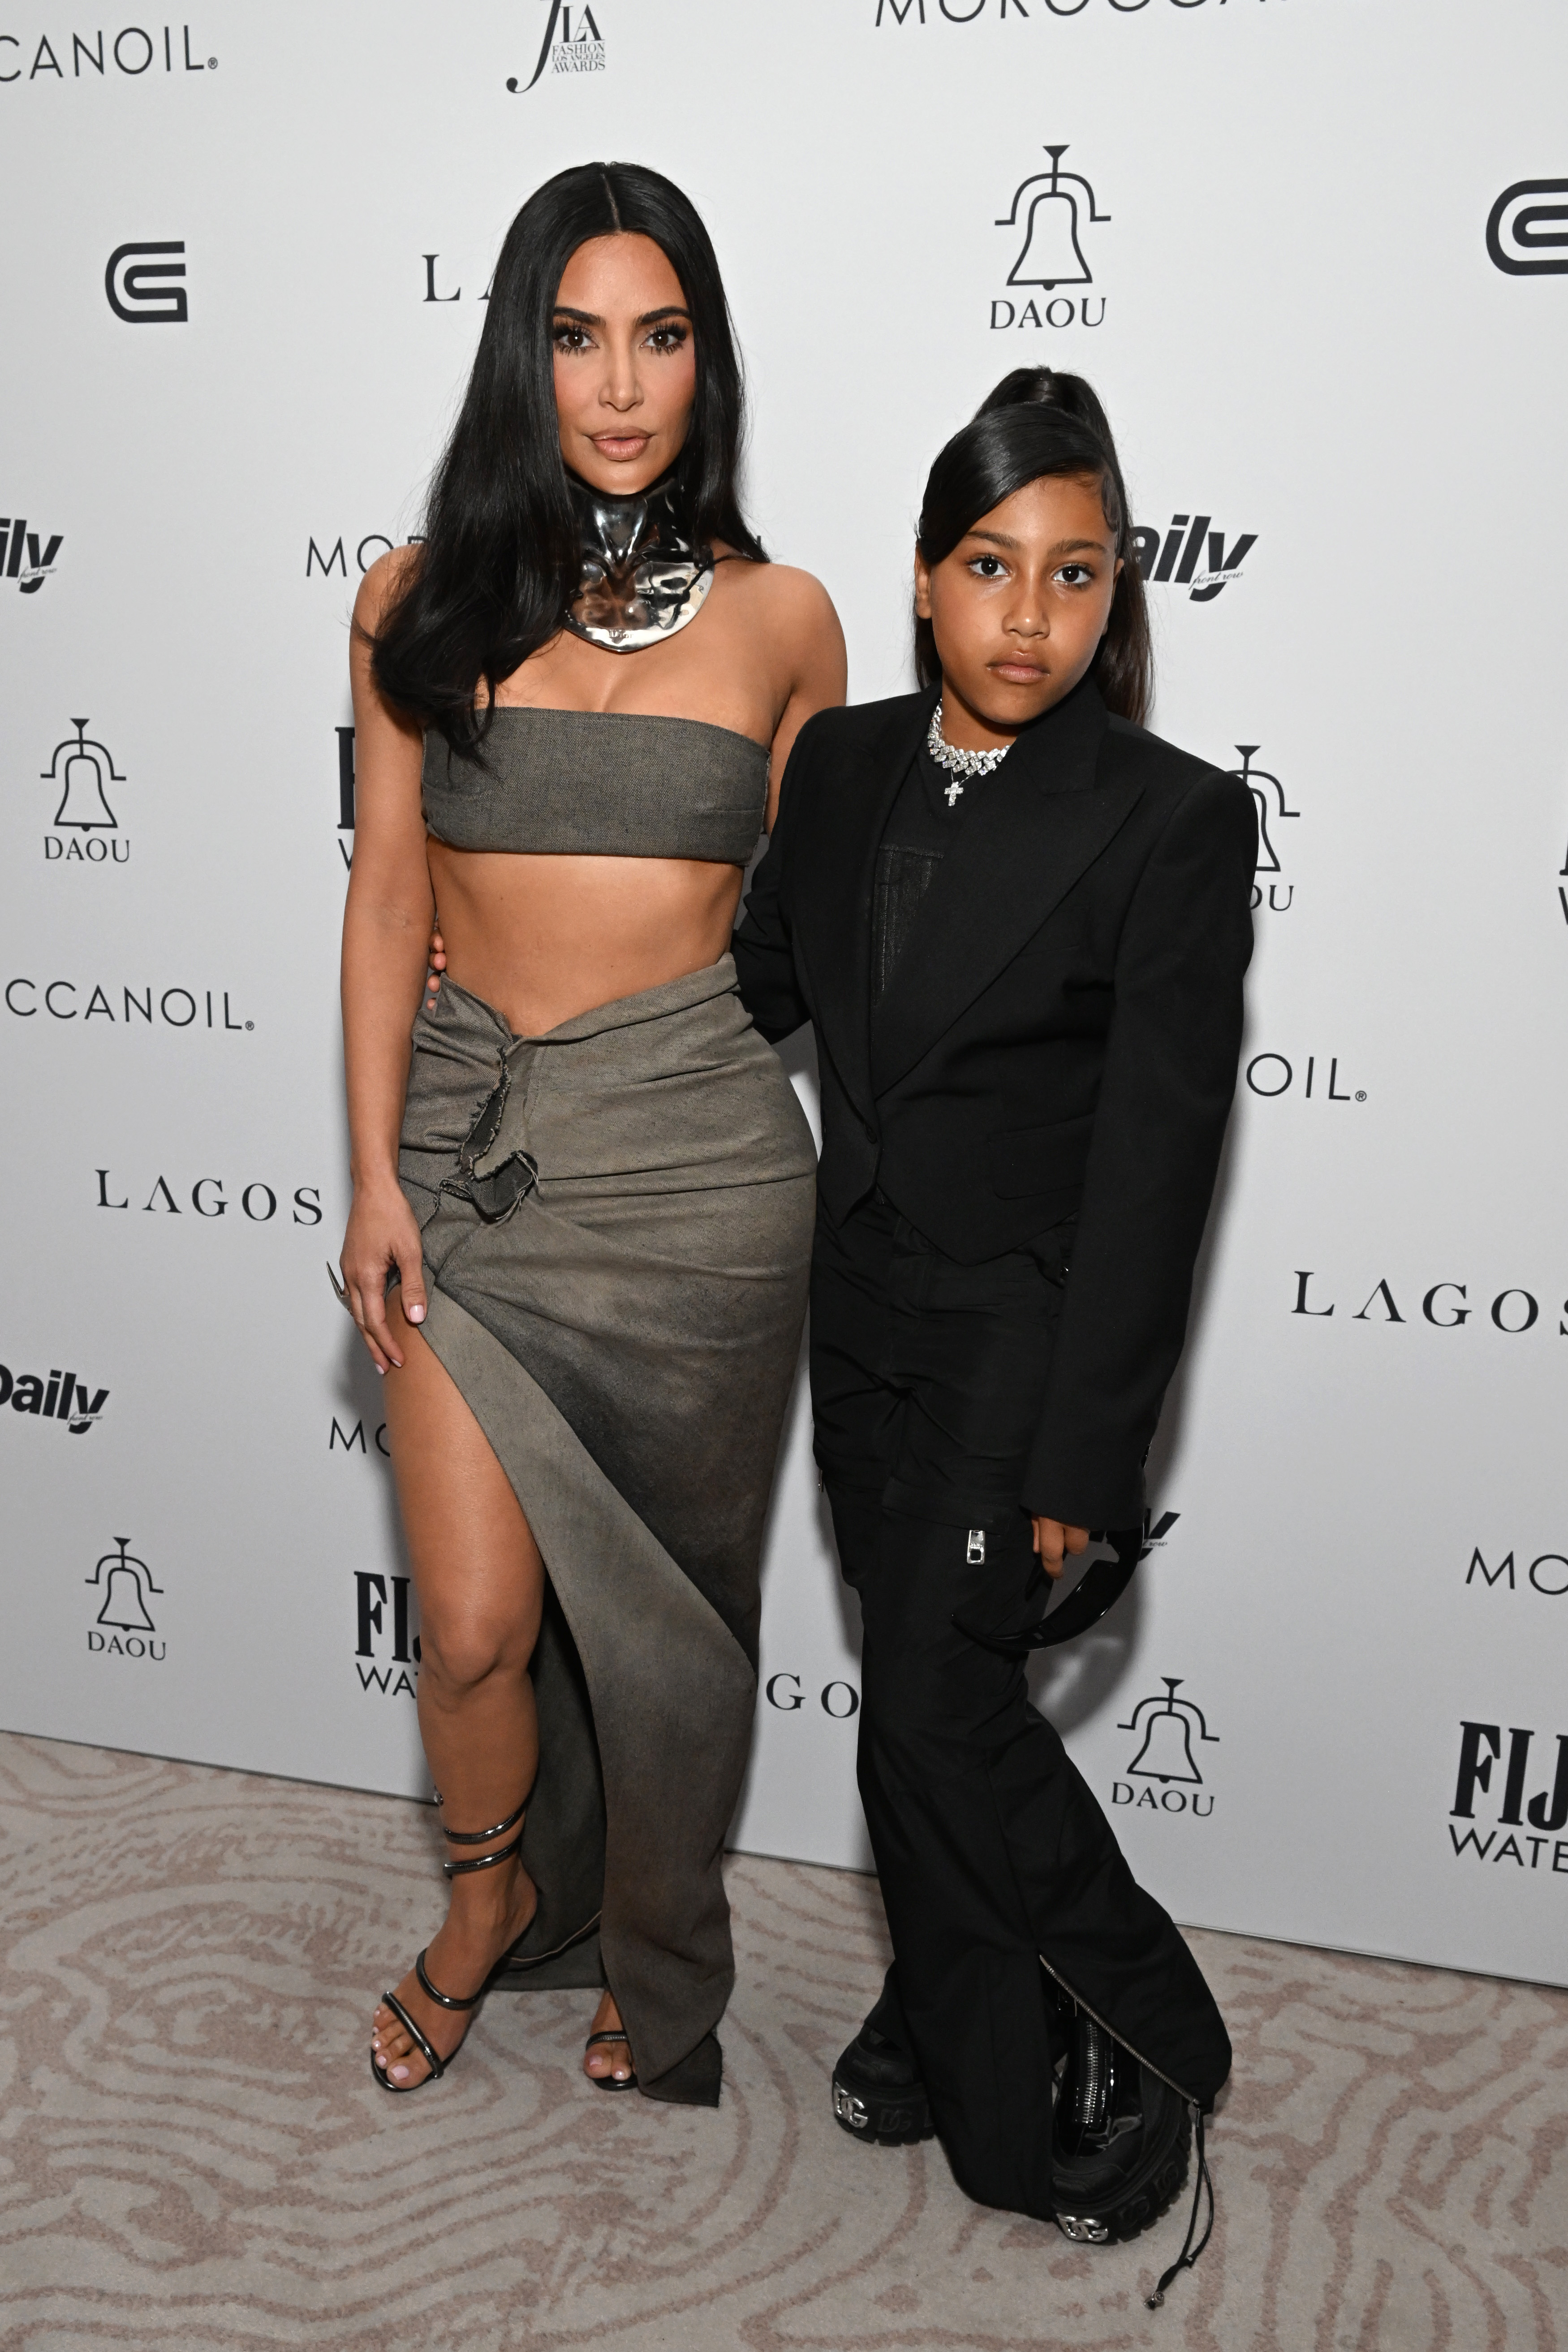 North is Kim's eldest child, and when she's not mocking her mom the preteen is making big moves